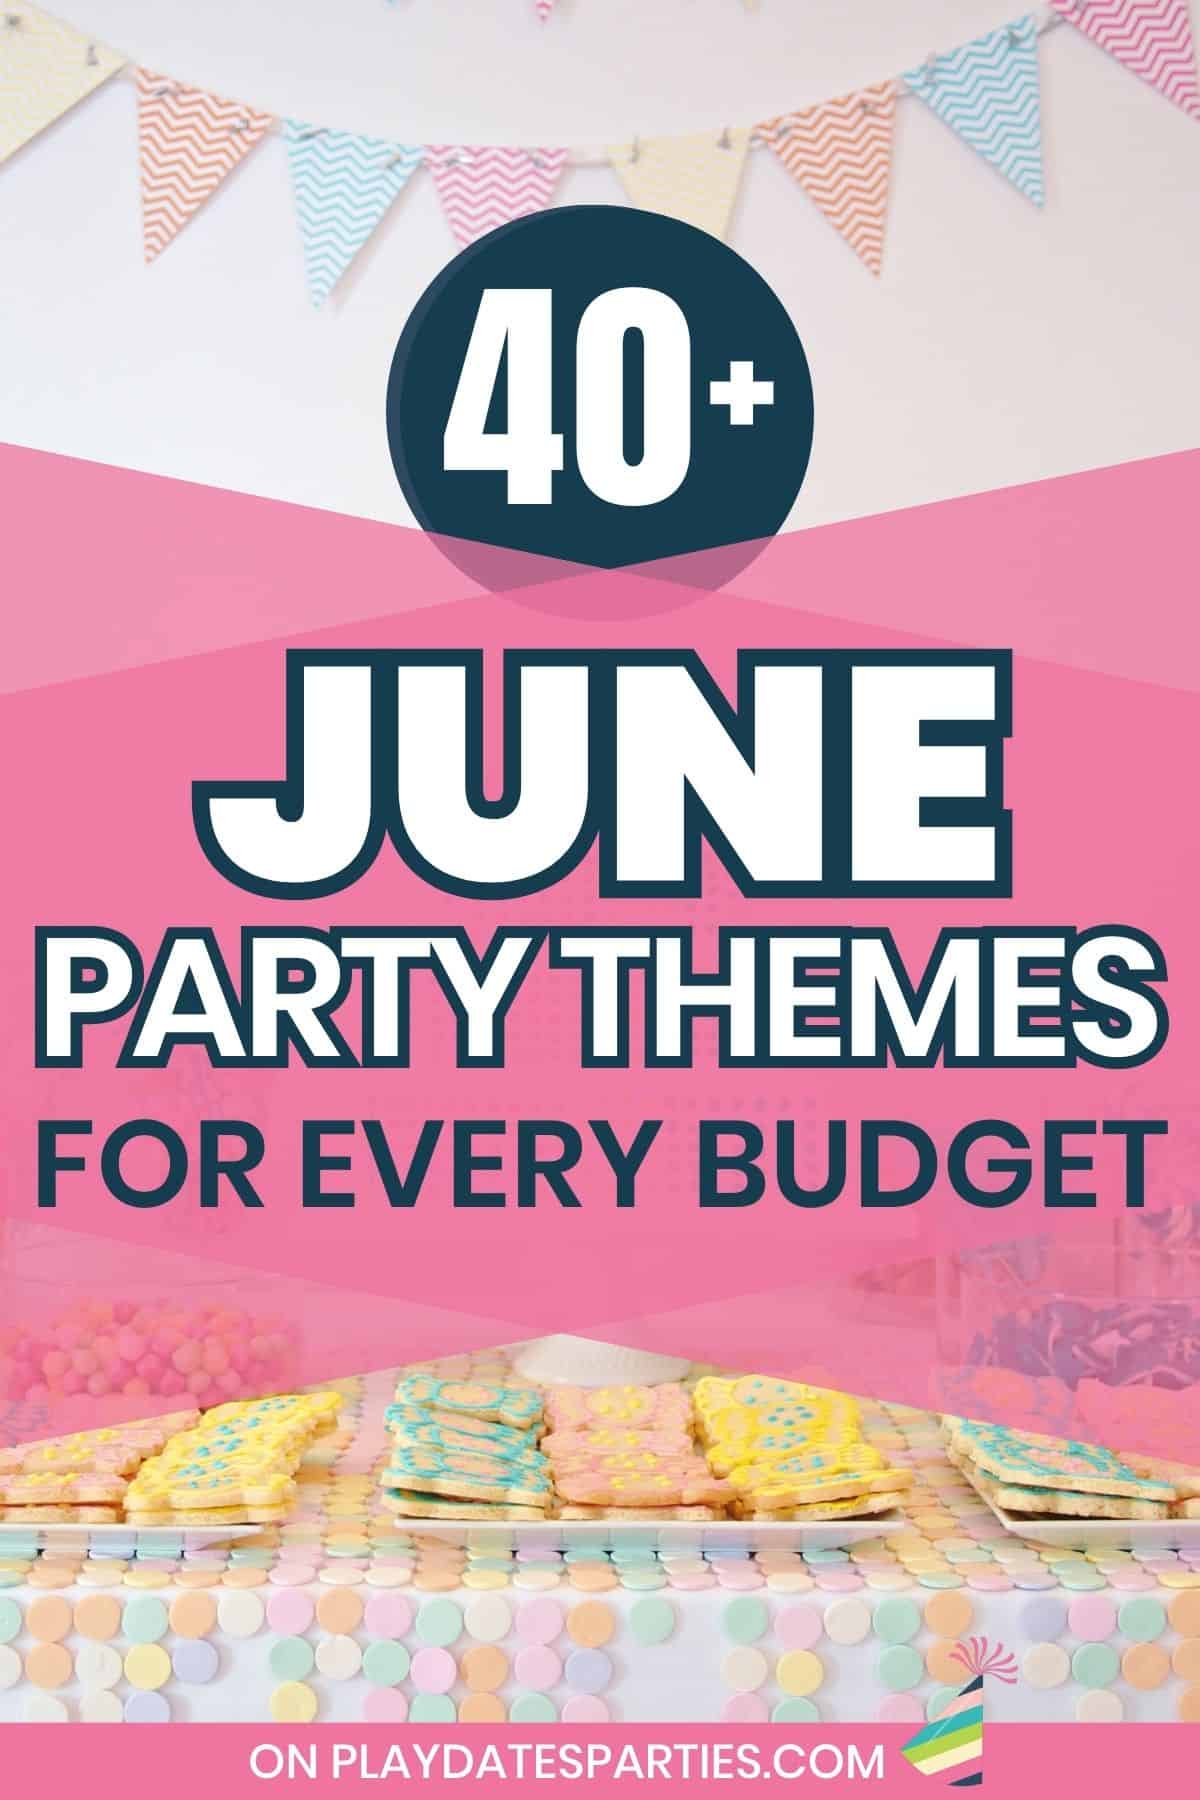 June Party Themes for Every Budget Pin Image